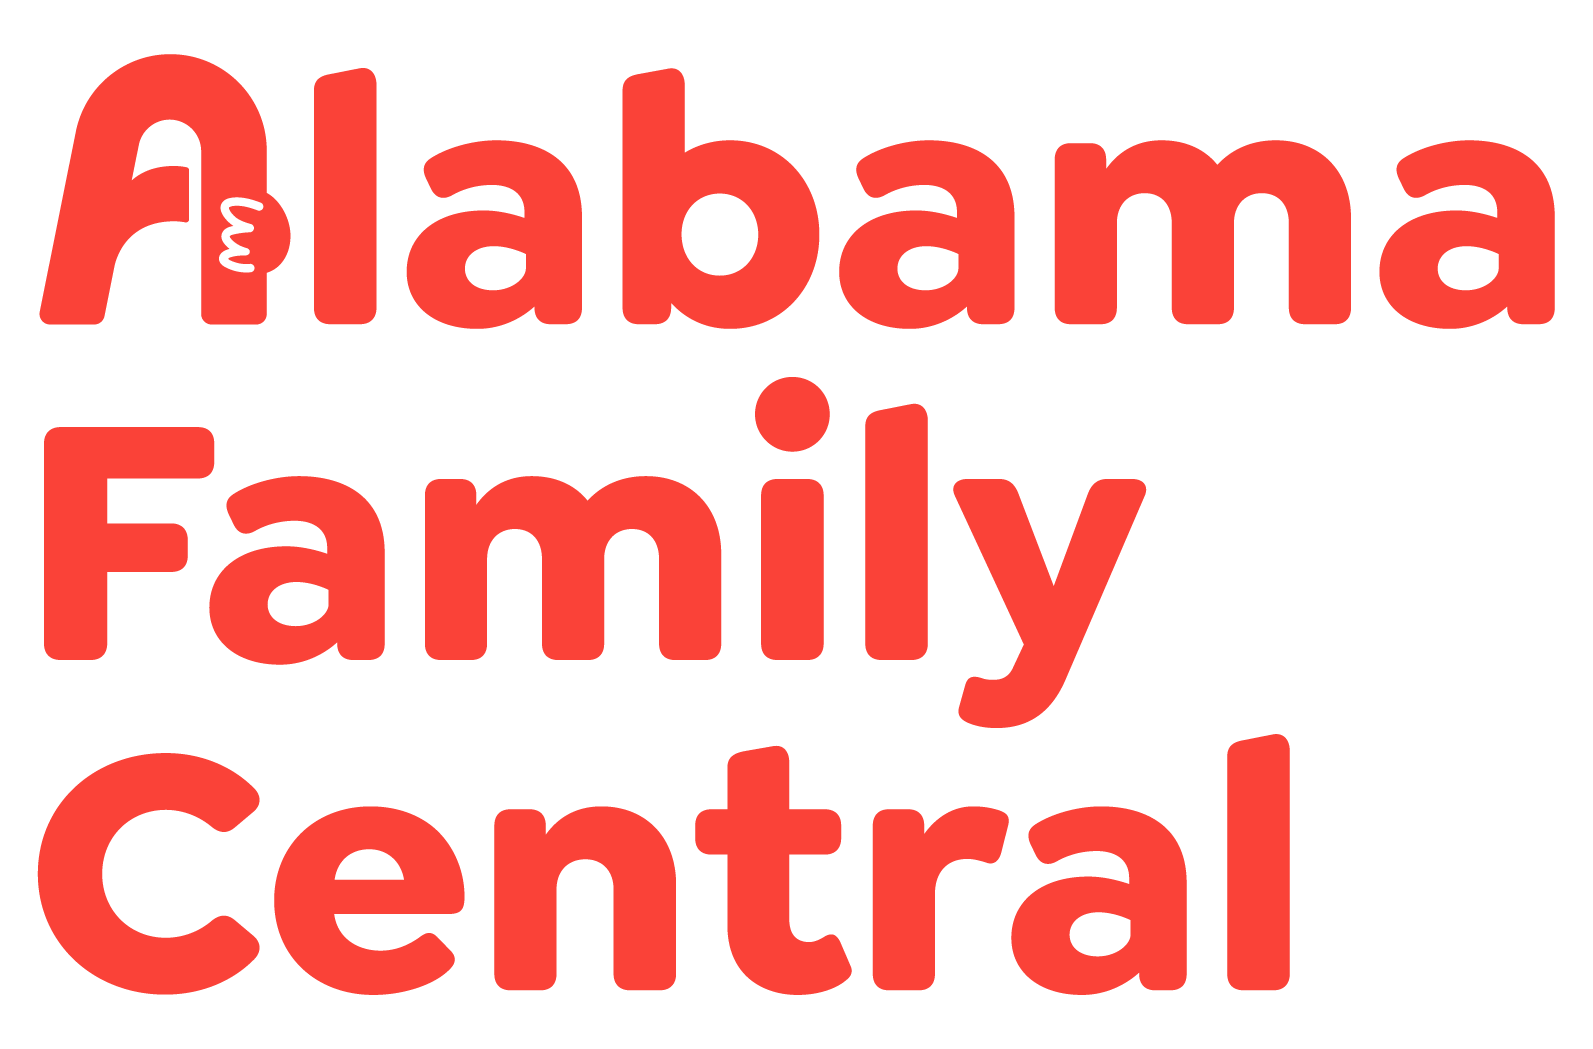 Governor Ivey Announces Creation of the Alabama Family Central Website